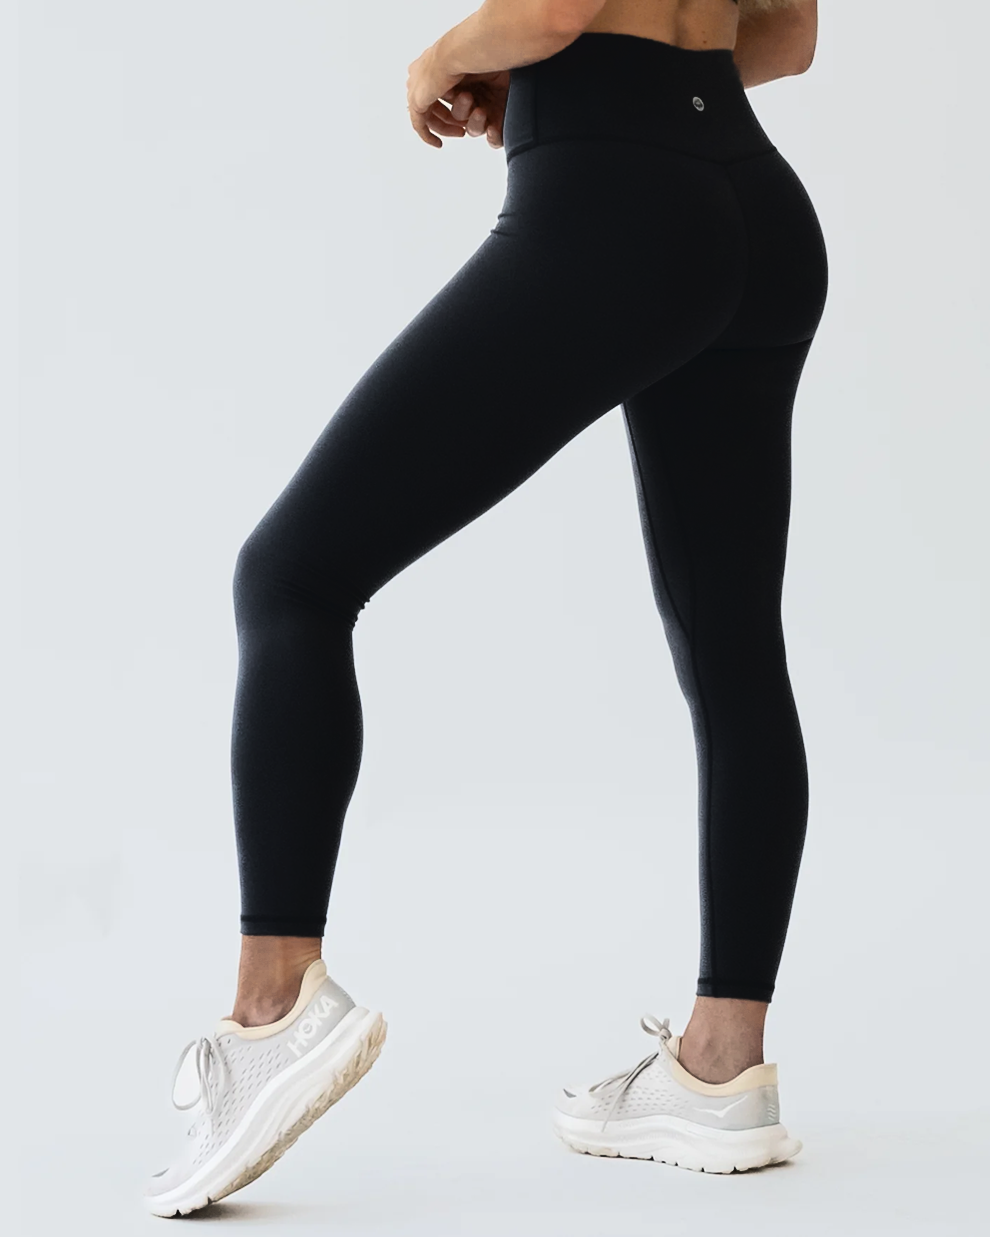 Fabletics - Review Chatter